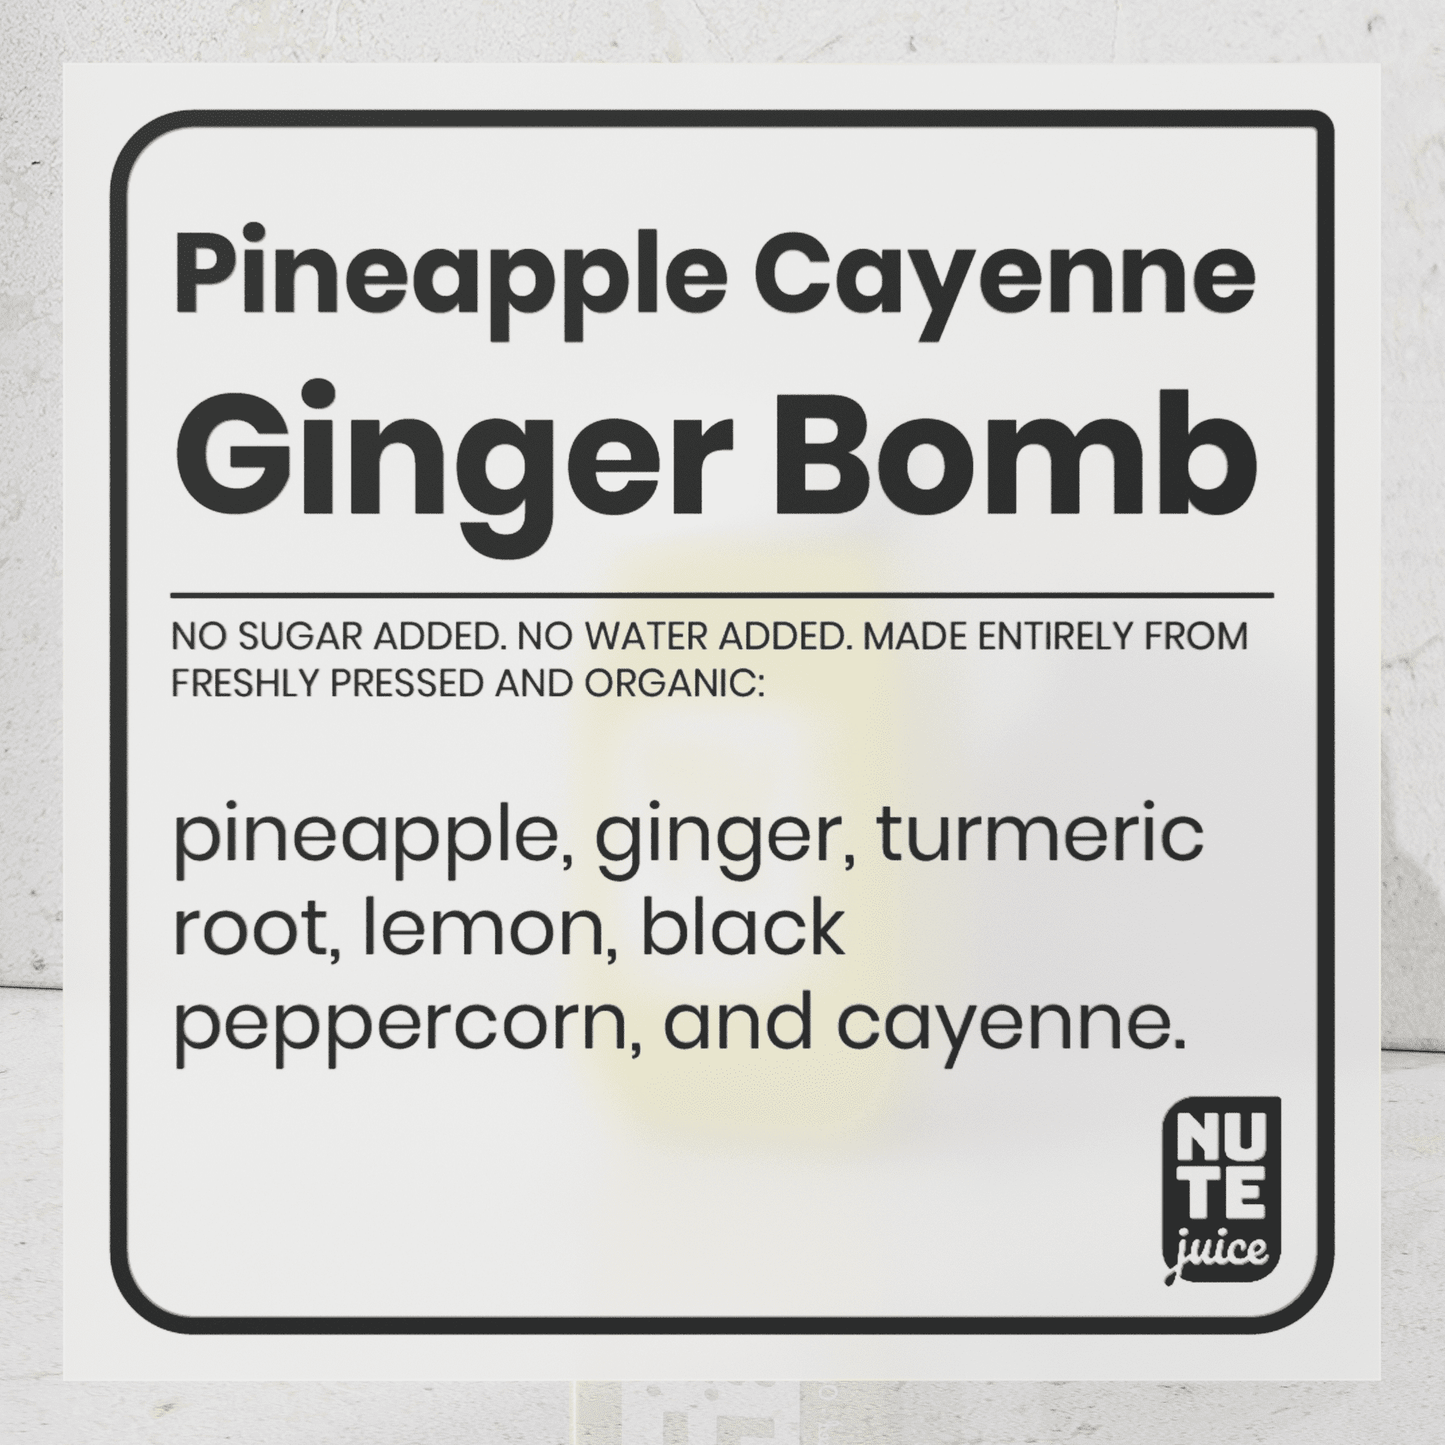 Pineapple Cayenne Ginger Bomb